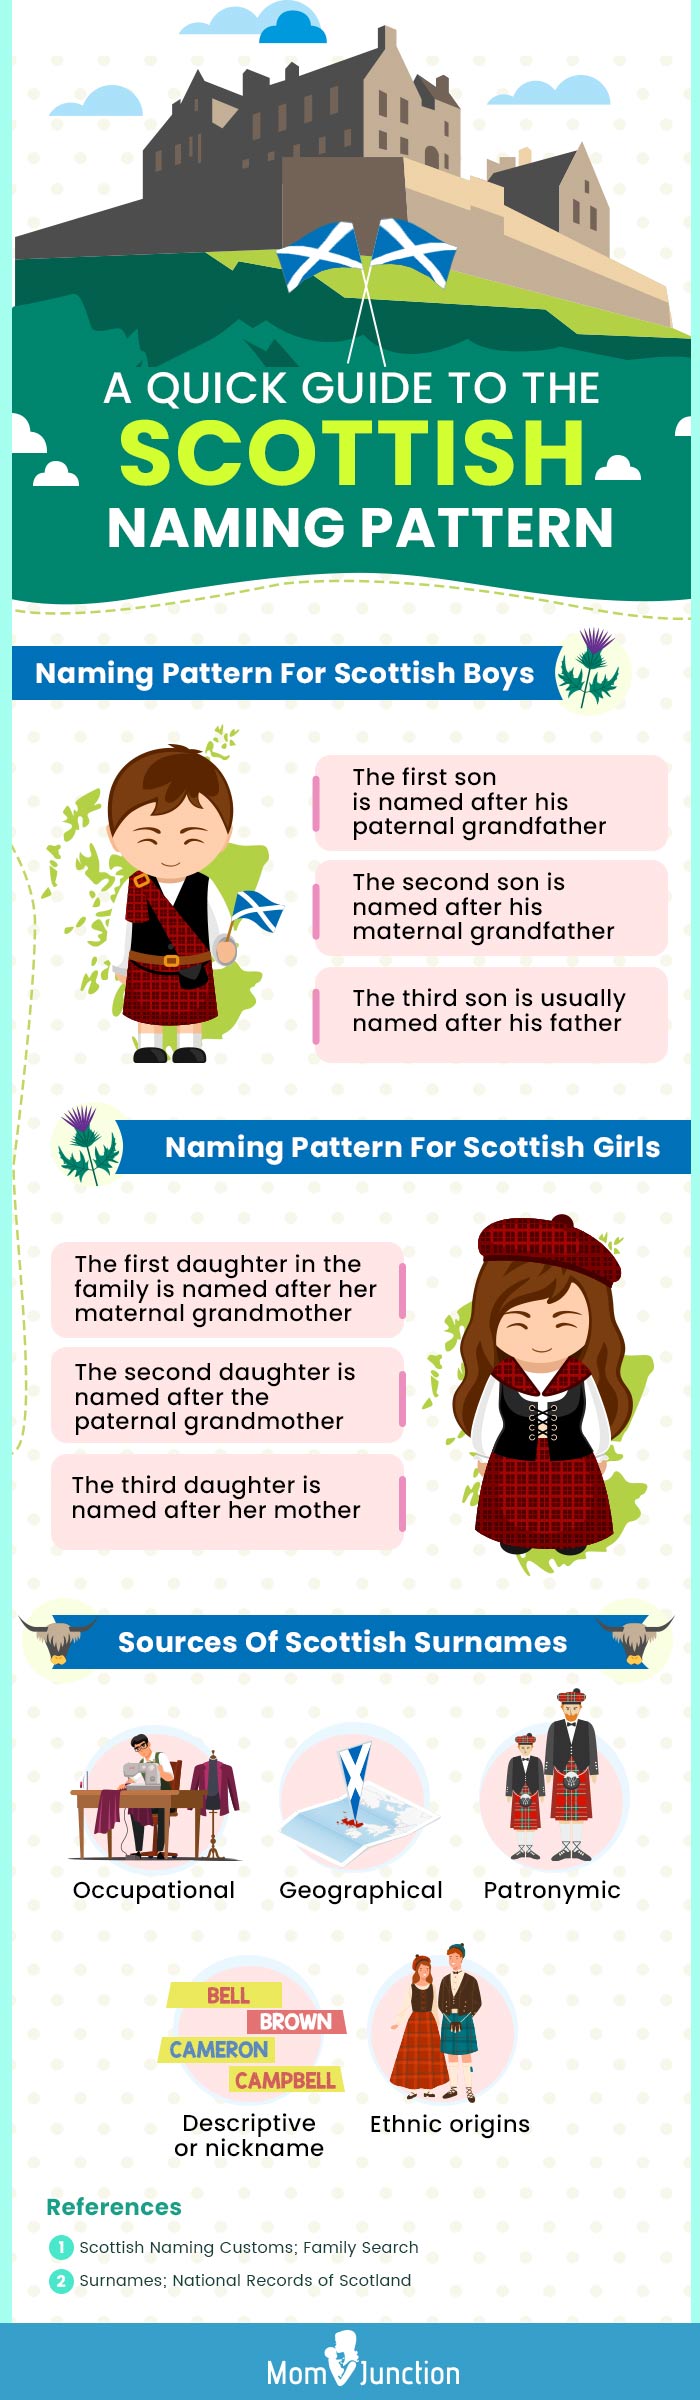 a quick guide to the scottish naming pattern (infographic)